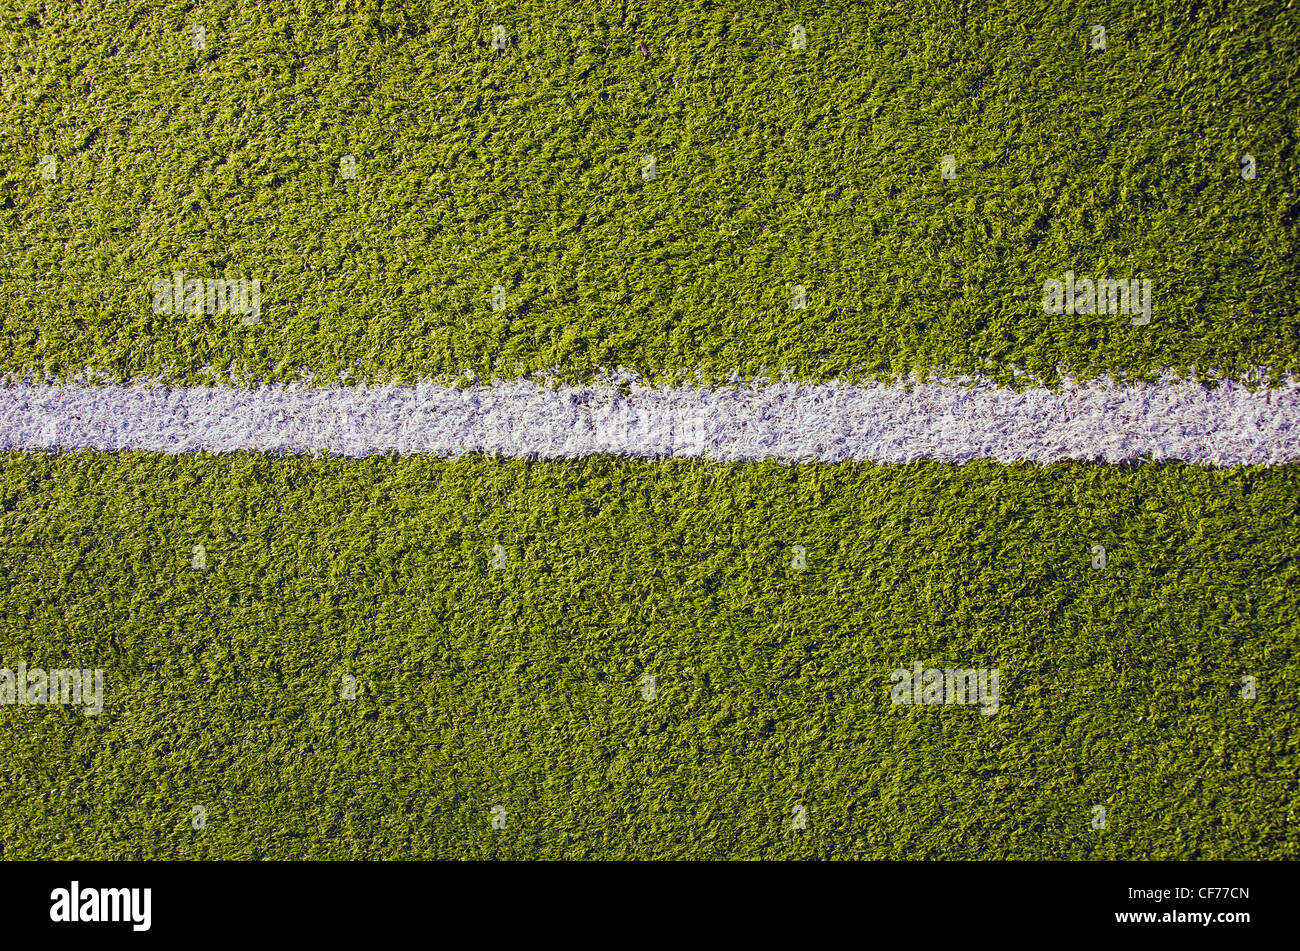 Synthetic sports pitches athletic green surface and white markings closeup background backdrop. Stock Photo